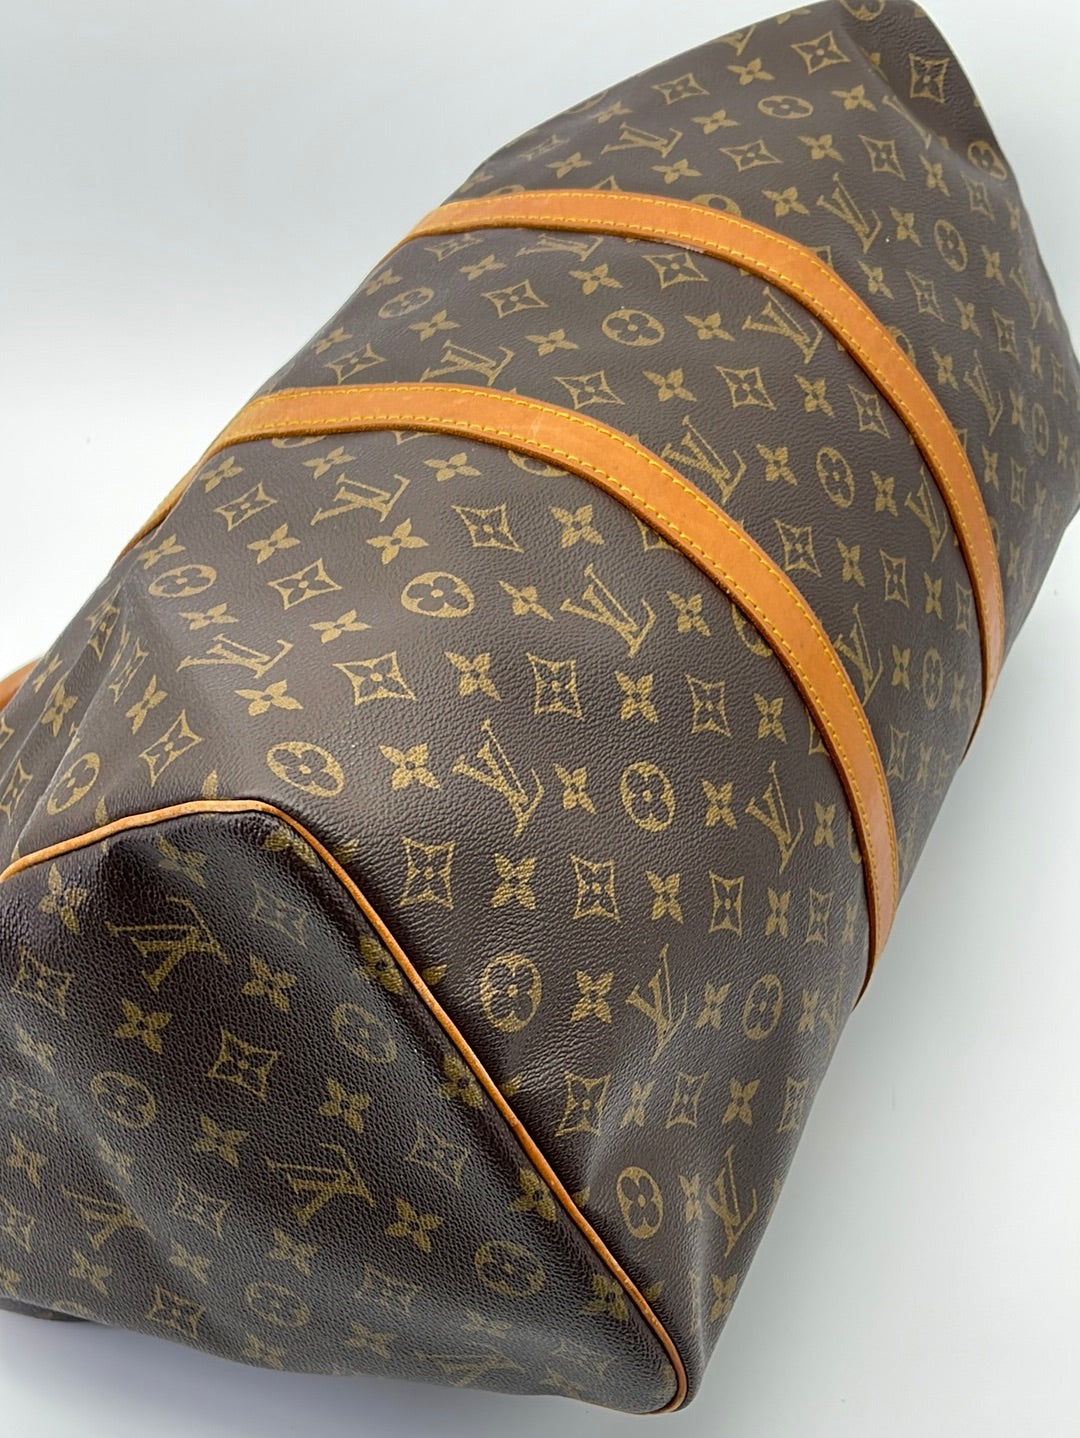 LOUIS VUITTON  YELLOW MONOGRAM KEEPALL BANDOULÍÈRE 50 IN